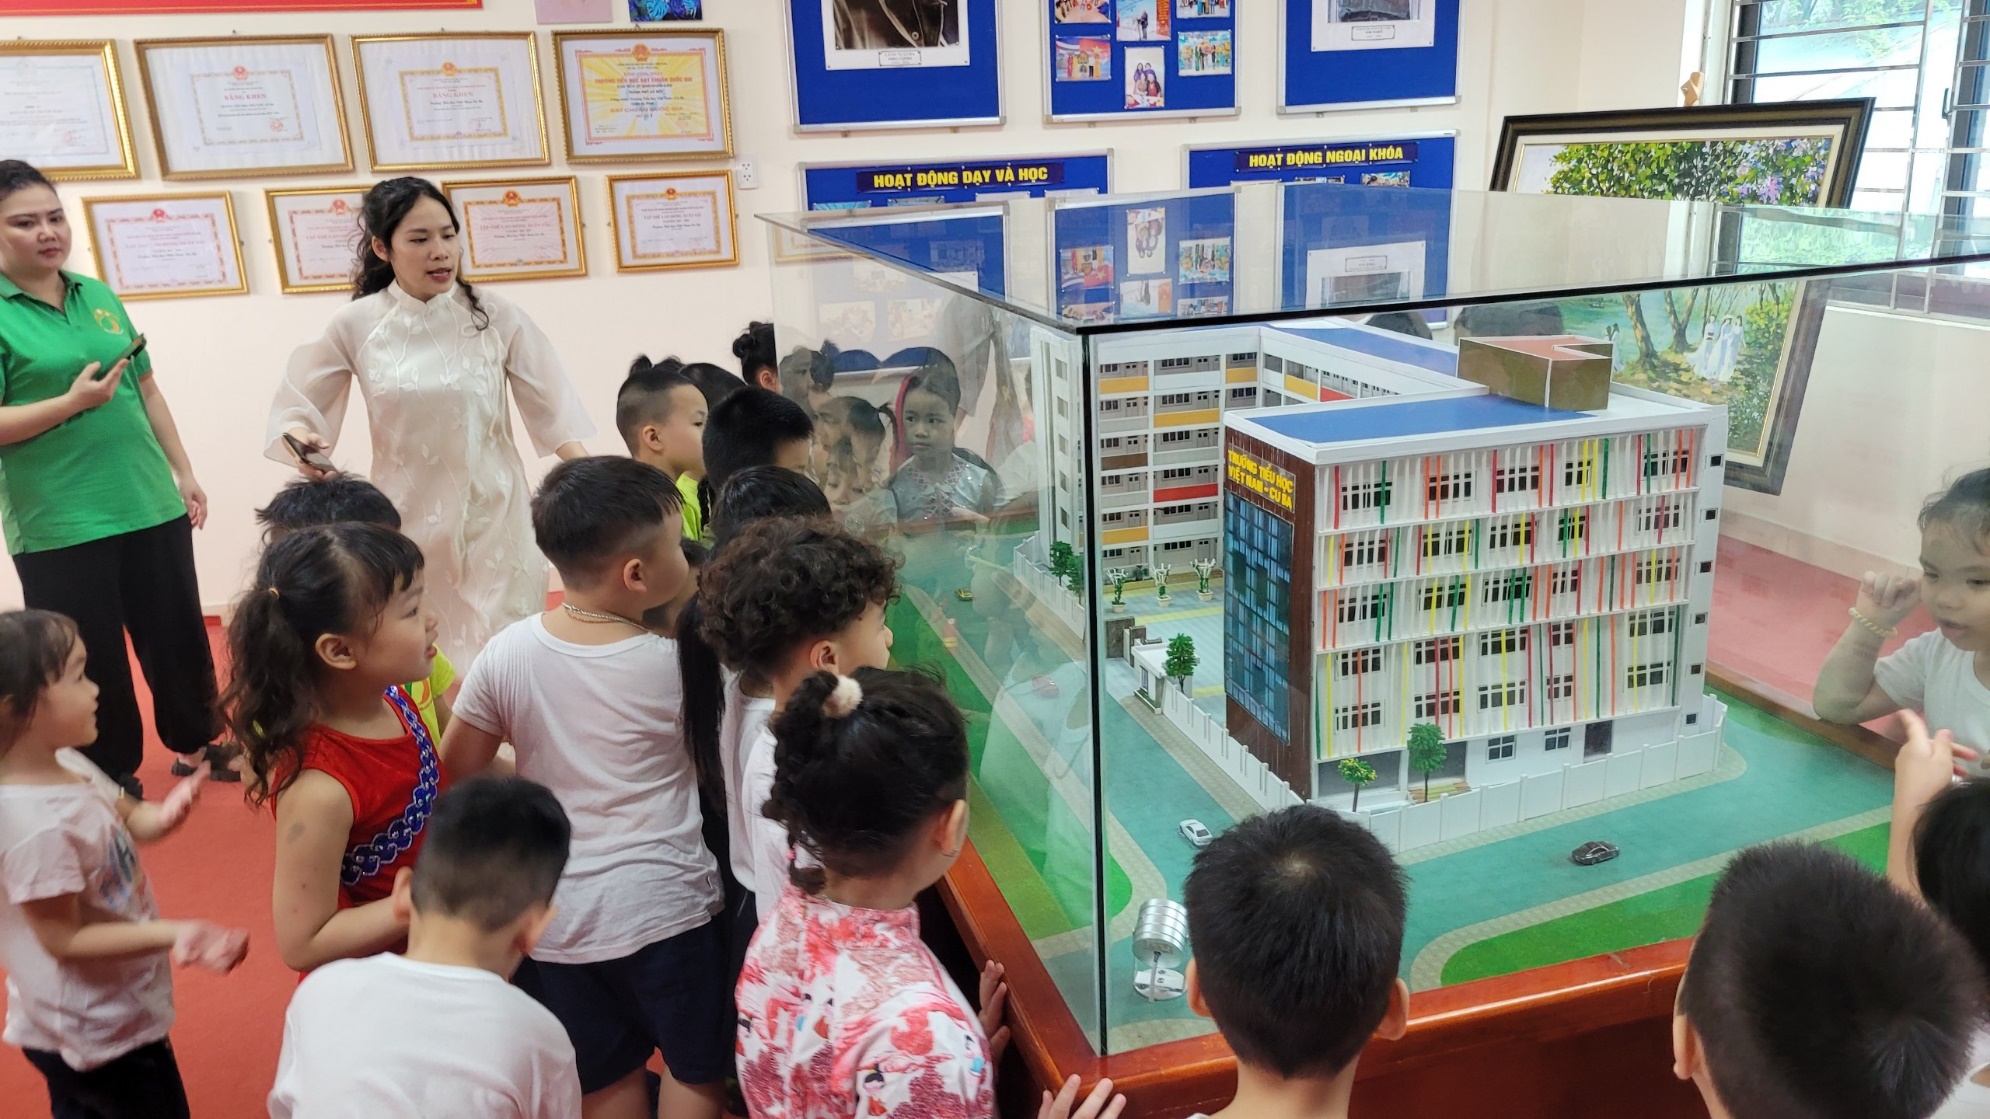 A group of children looking at a model of a building

Description automatically generated